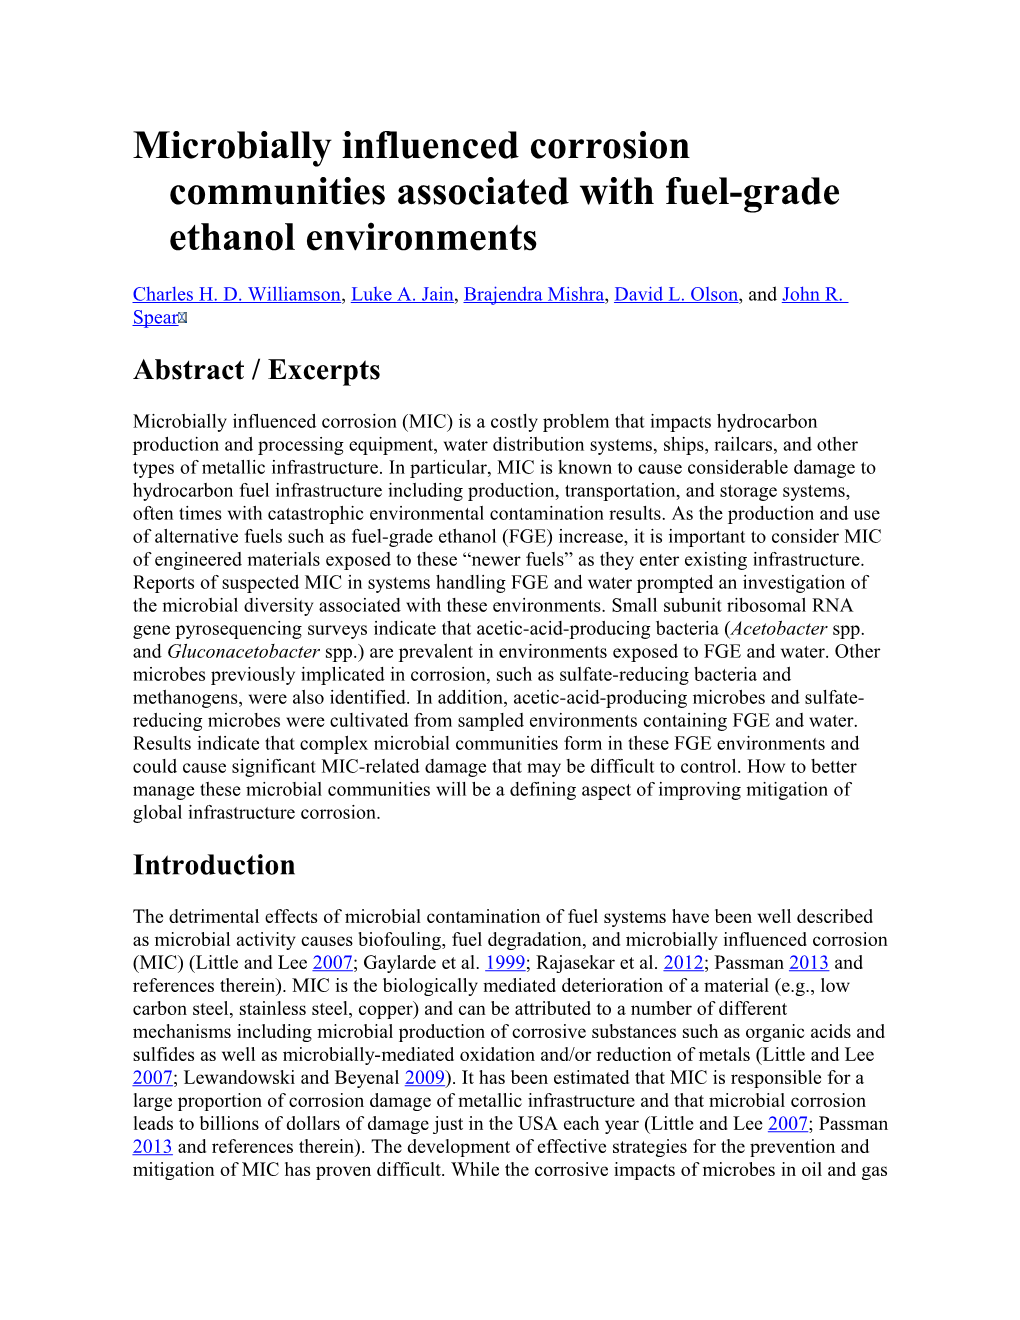 Microbially Influenced Corrosion Communities Associated with Fuel-Grade Ethanol Environments